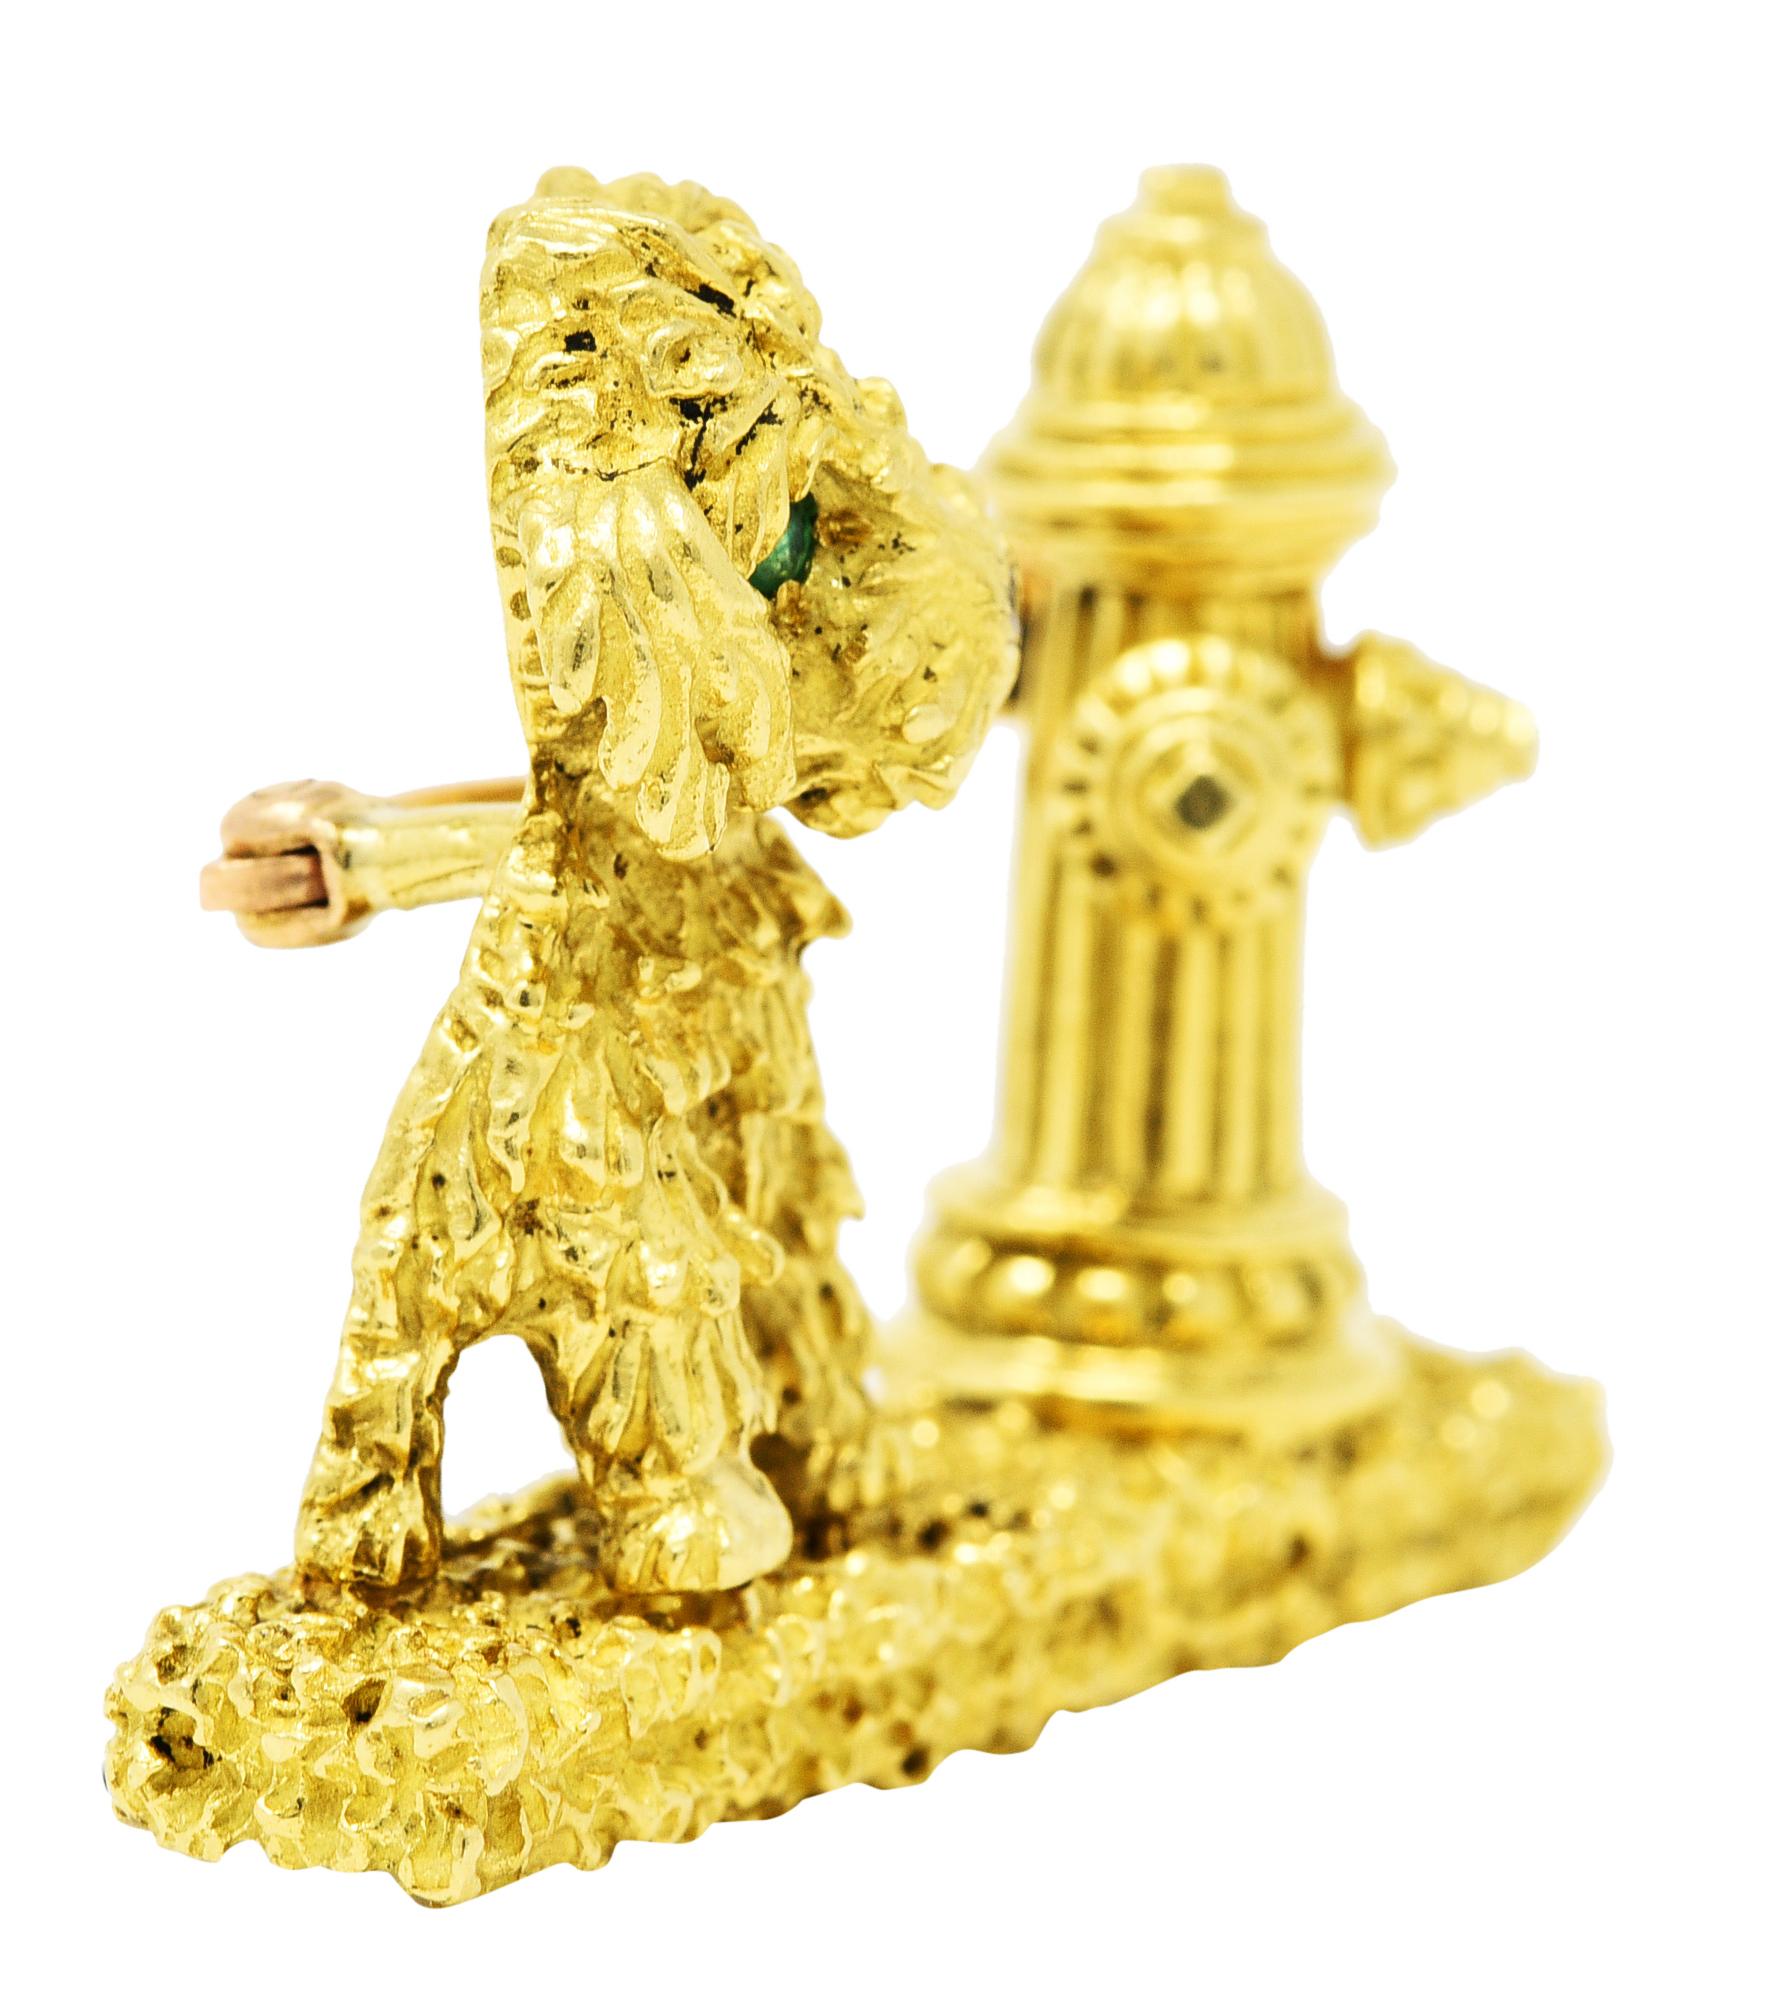 Brooch is designed as texturous dog sitting next to highly rendered fire hydrant

Accented by flush set round cut emerald eyes - transparent and bright green

With a flush set round cut diamond nose - eye clean and bright

Stones weigh collectively